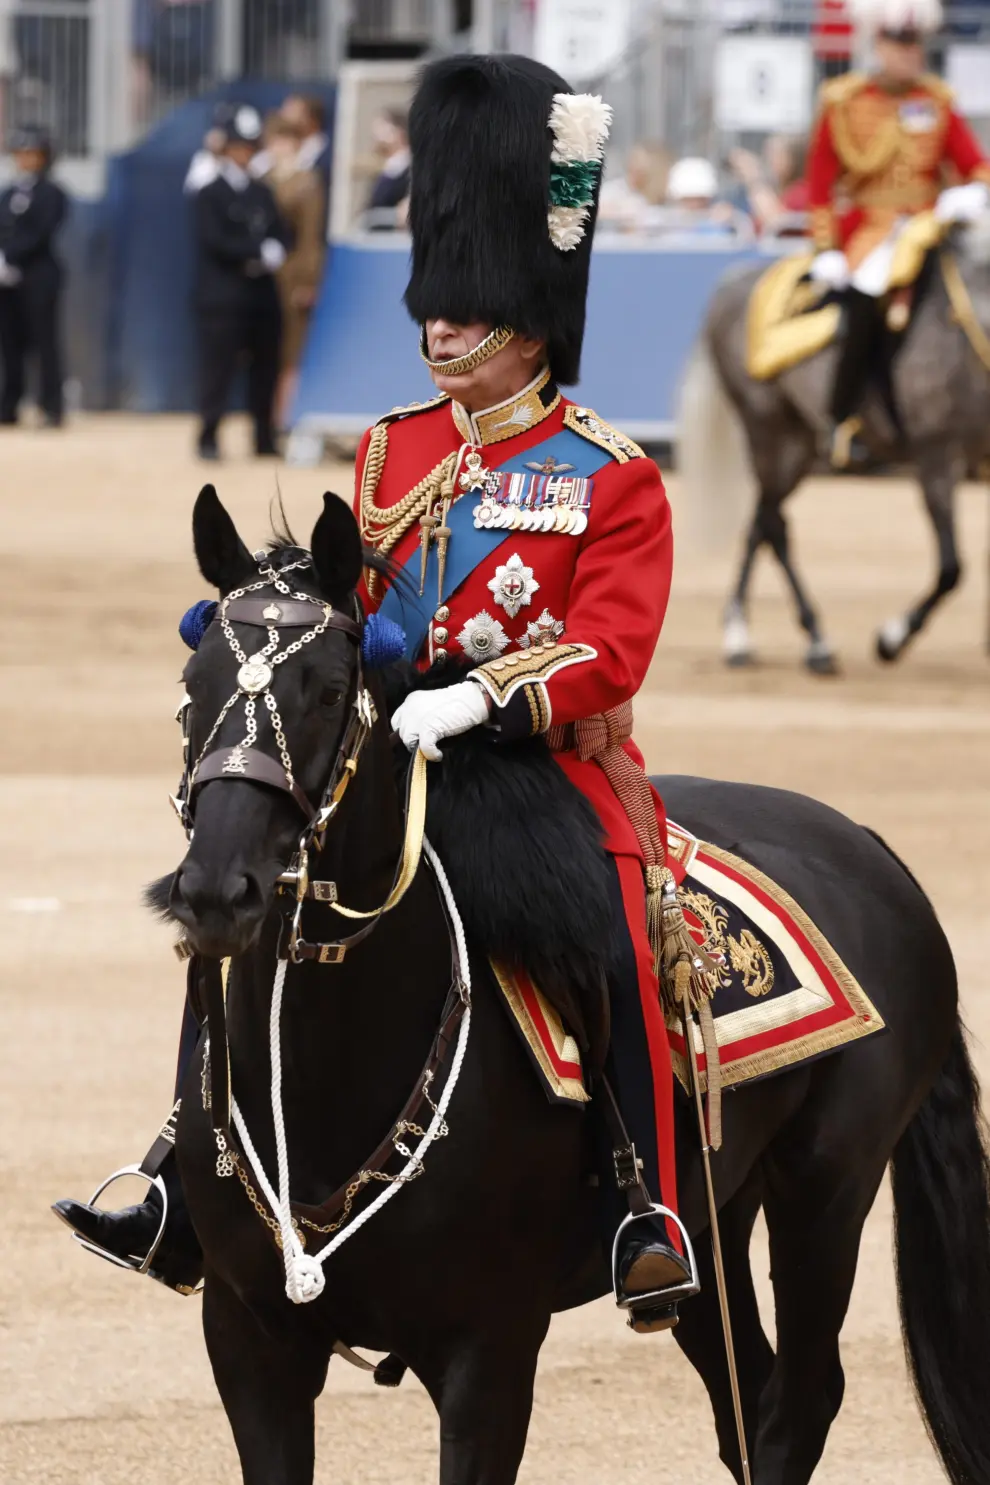 London (United Kingdom), 17/06/2023.- A handout photo made available by Britain's Ministry of Defence shows Princess Sophie, The Duchess of Edinburgh, and Vice Admiral Sir Timothy Laurence arriving by carriage at Horse Guards during the Trooping the Colour parade for King Charles III birthday, in London, Britain, 17 June 2023. The Trooping of the Colour traditionally marks the official birthday of the British Sovereign and features a parade of over 1,400 soldiers, 200 horses and 400 musicians. (Reino Unido, Edimburgo, Londres) EFE/EPA/Sgt Donald C Todd/Ministry of Defence HANDOUT MANDATORY CREDIT HANDOUT EDITORIAL USE ONLY/NO SALES
 BRITAIN ROYALS